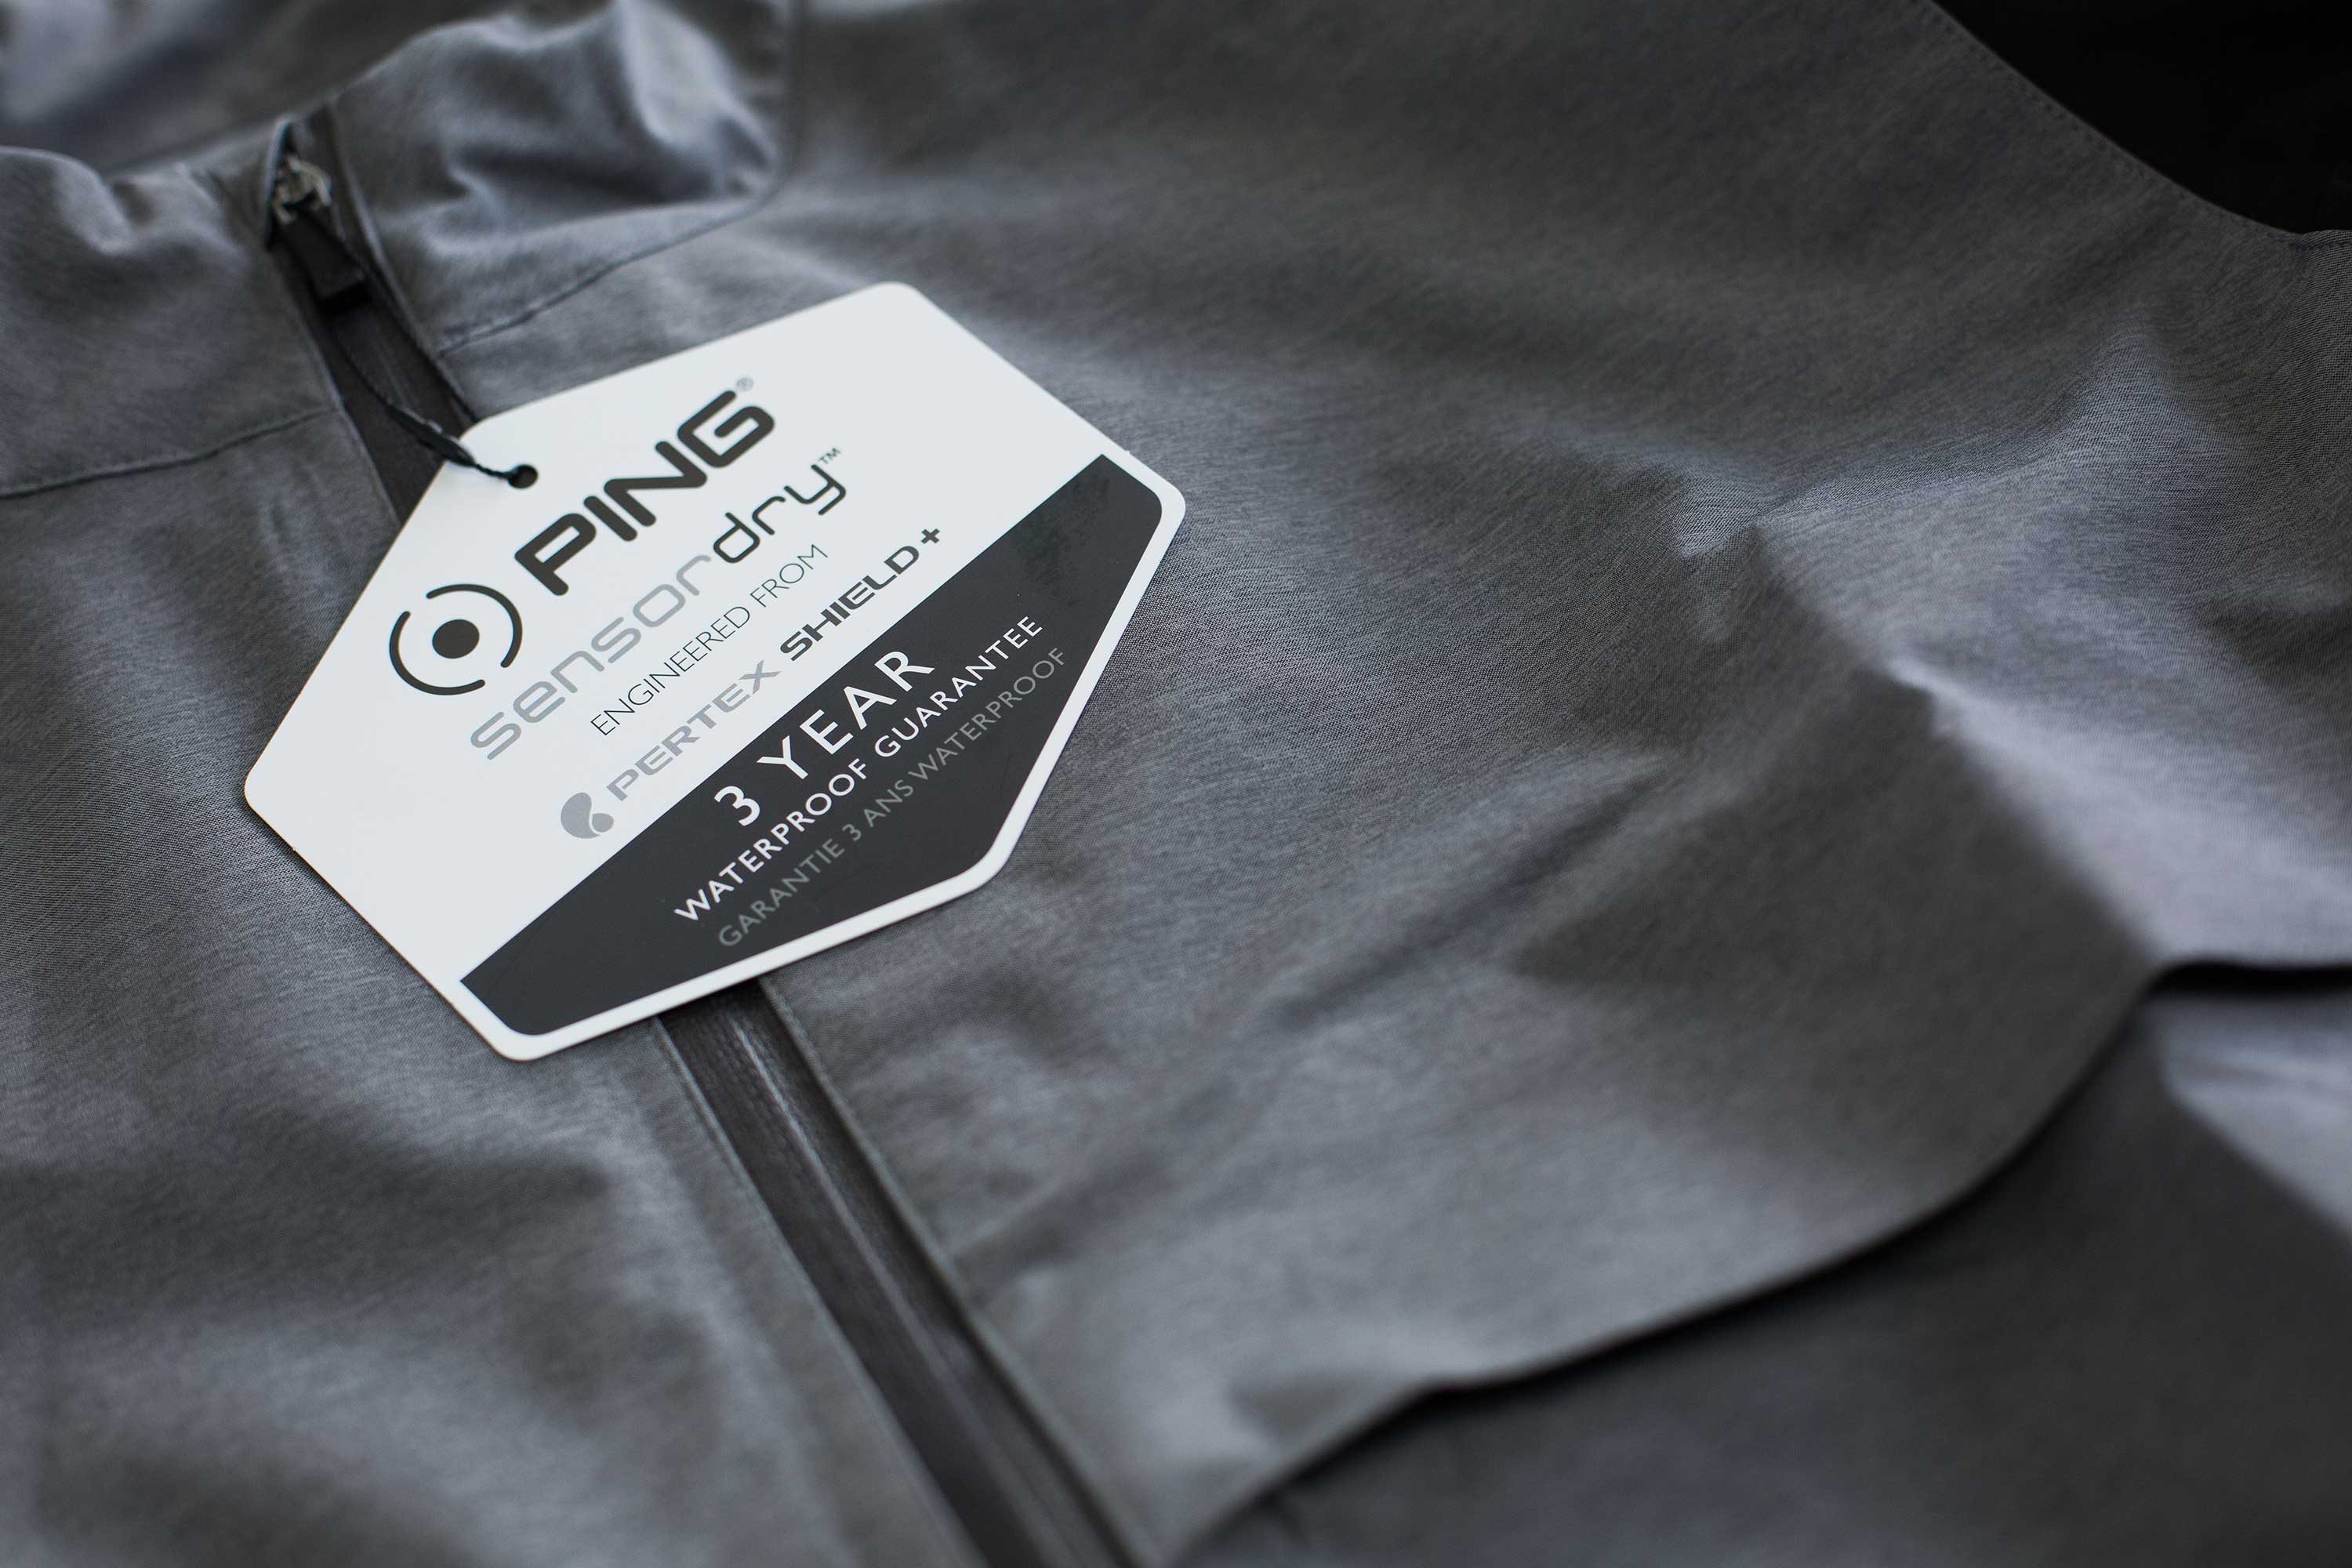 PING's Tour Eye jacket comes with a three-year waterproof guarantee